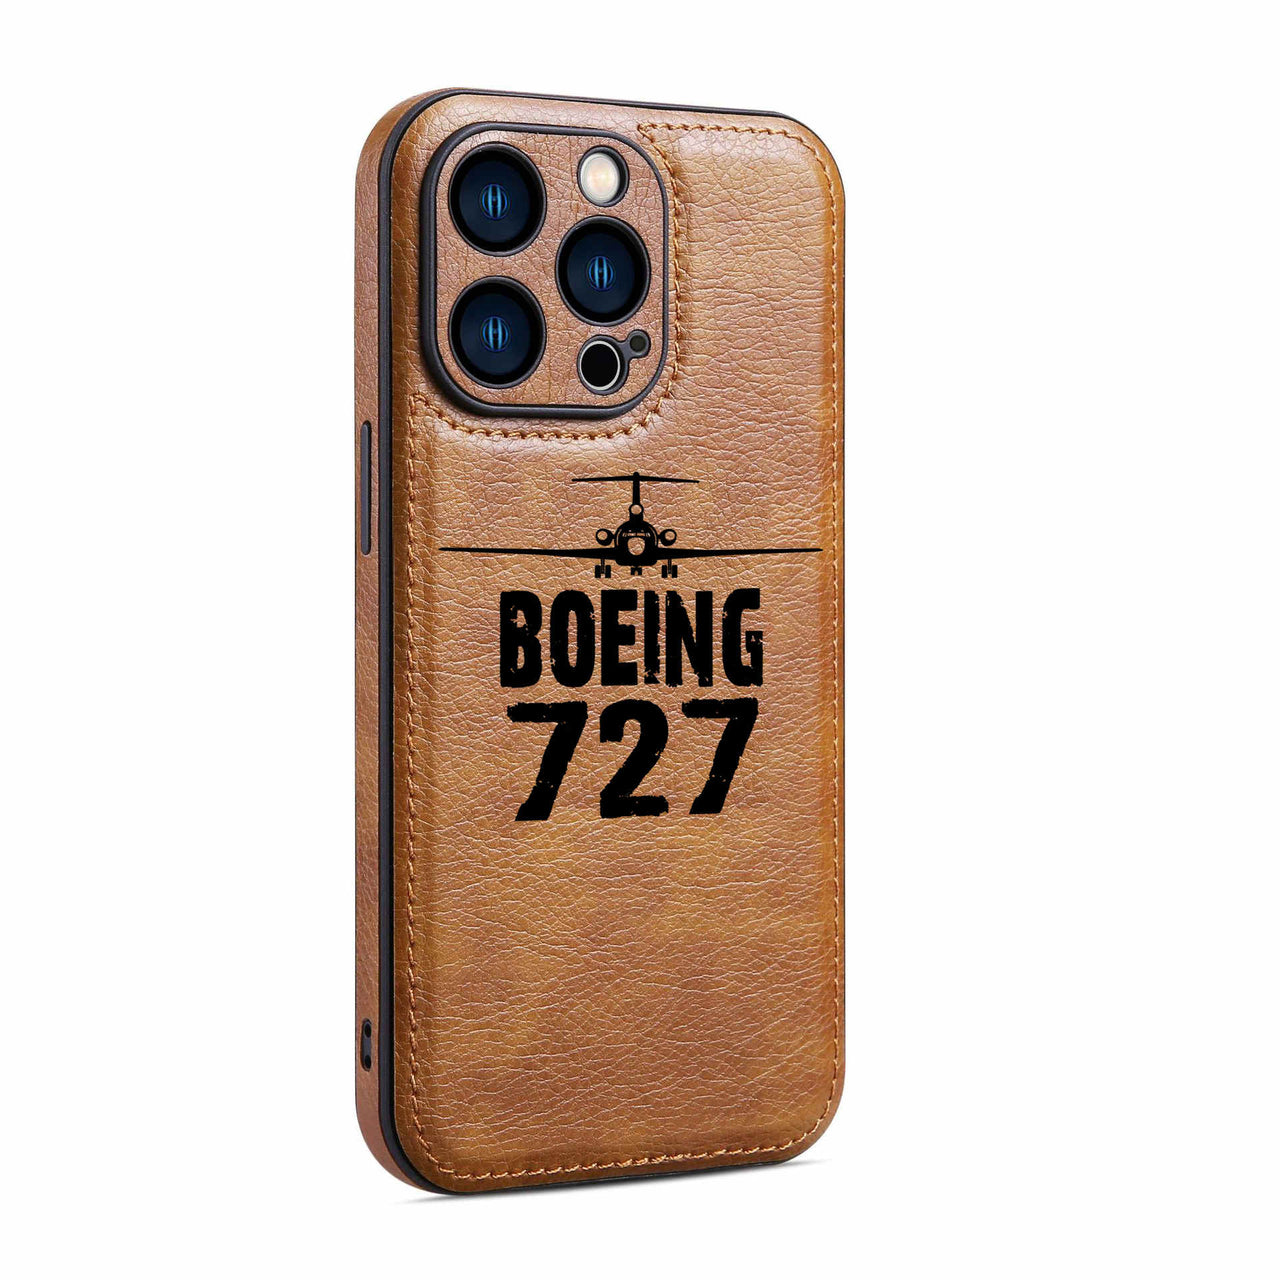 Boeing 727 & Plane Designed Leather iPhone Cases